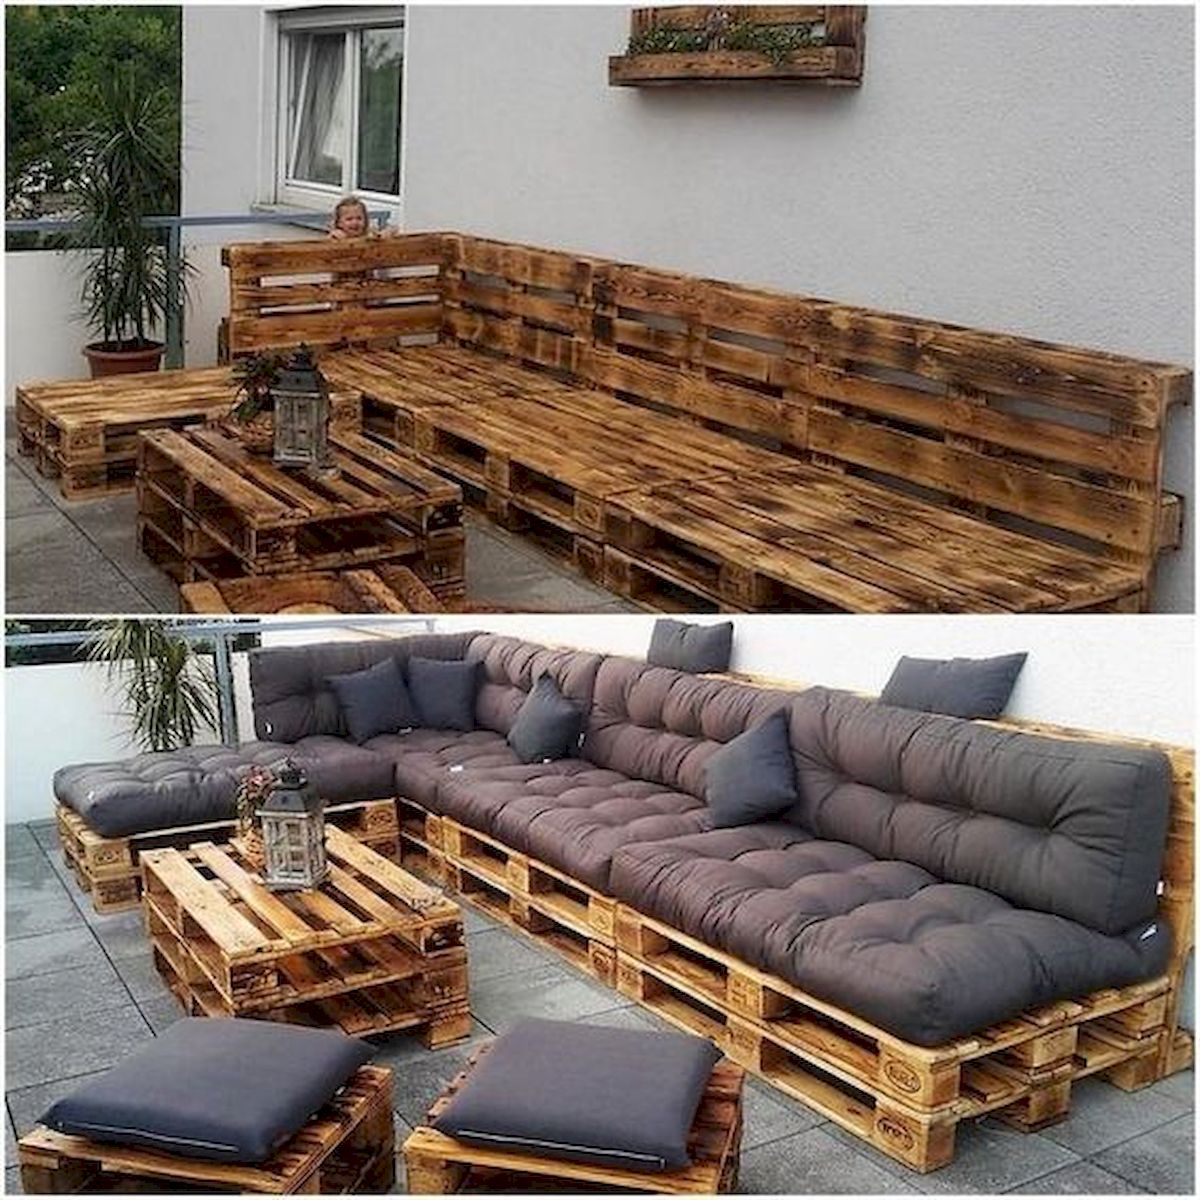 50 Amazing DIY Projects Outdoor Furniture Design Ideas (5)